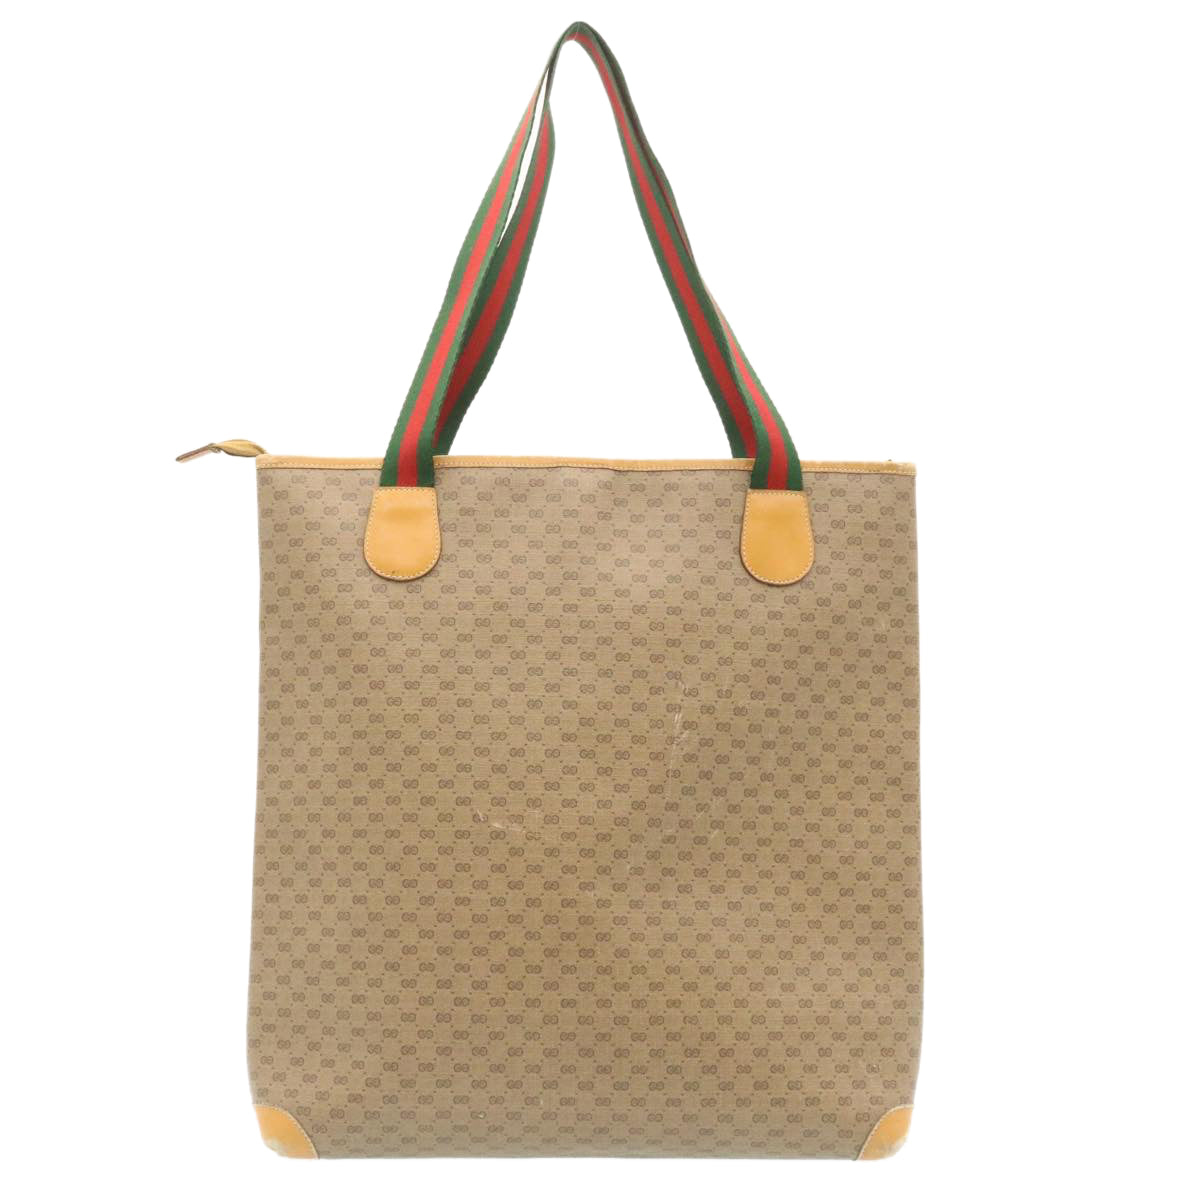 GUCCI Web Sherry Line Micro GG Canvas Tote Bag Beige Red Green Auth im299 - 0